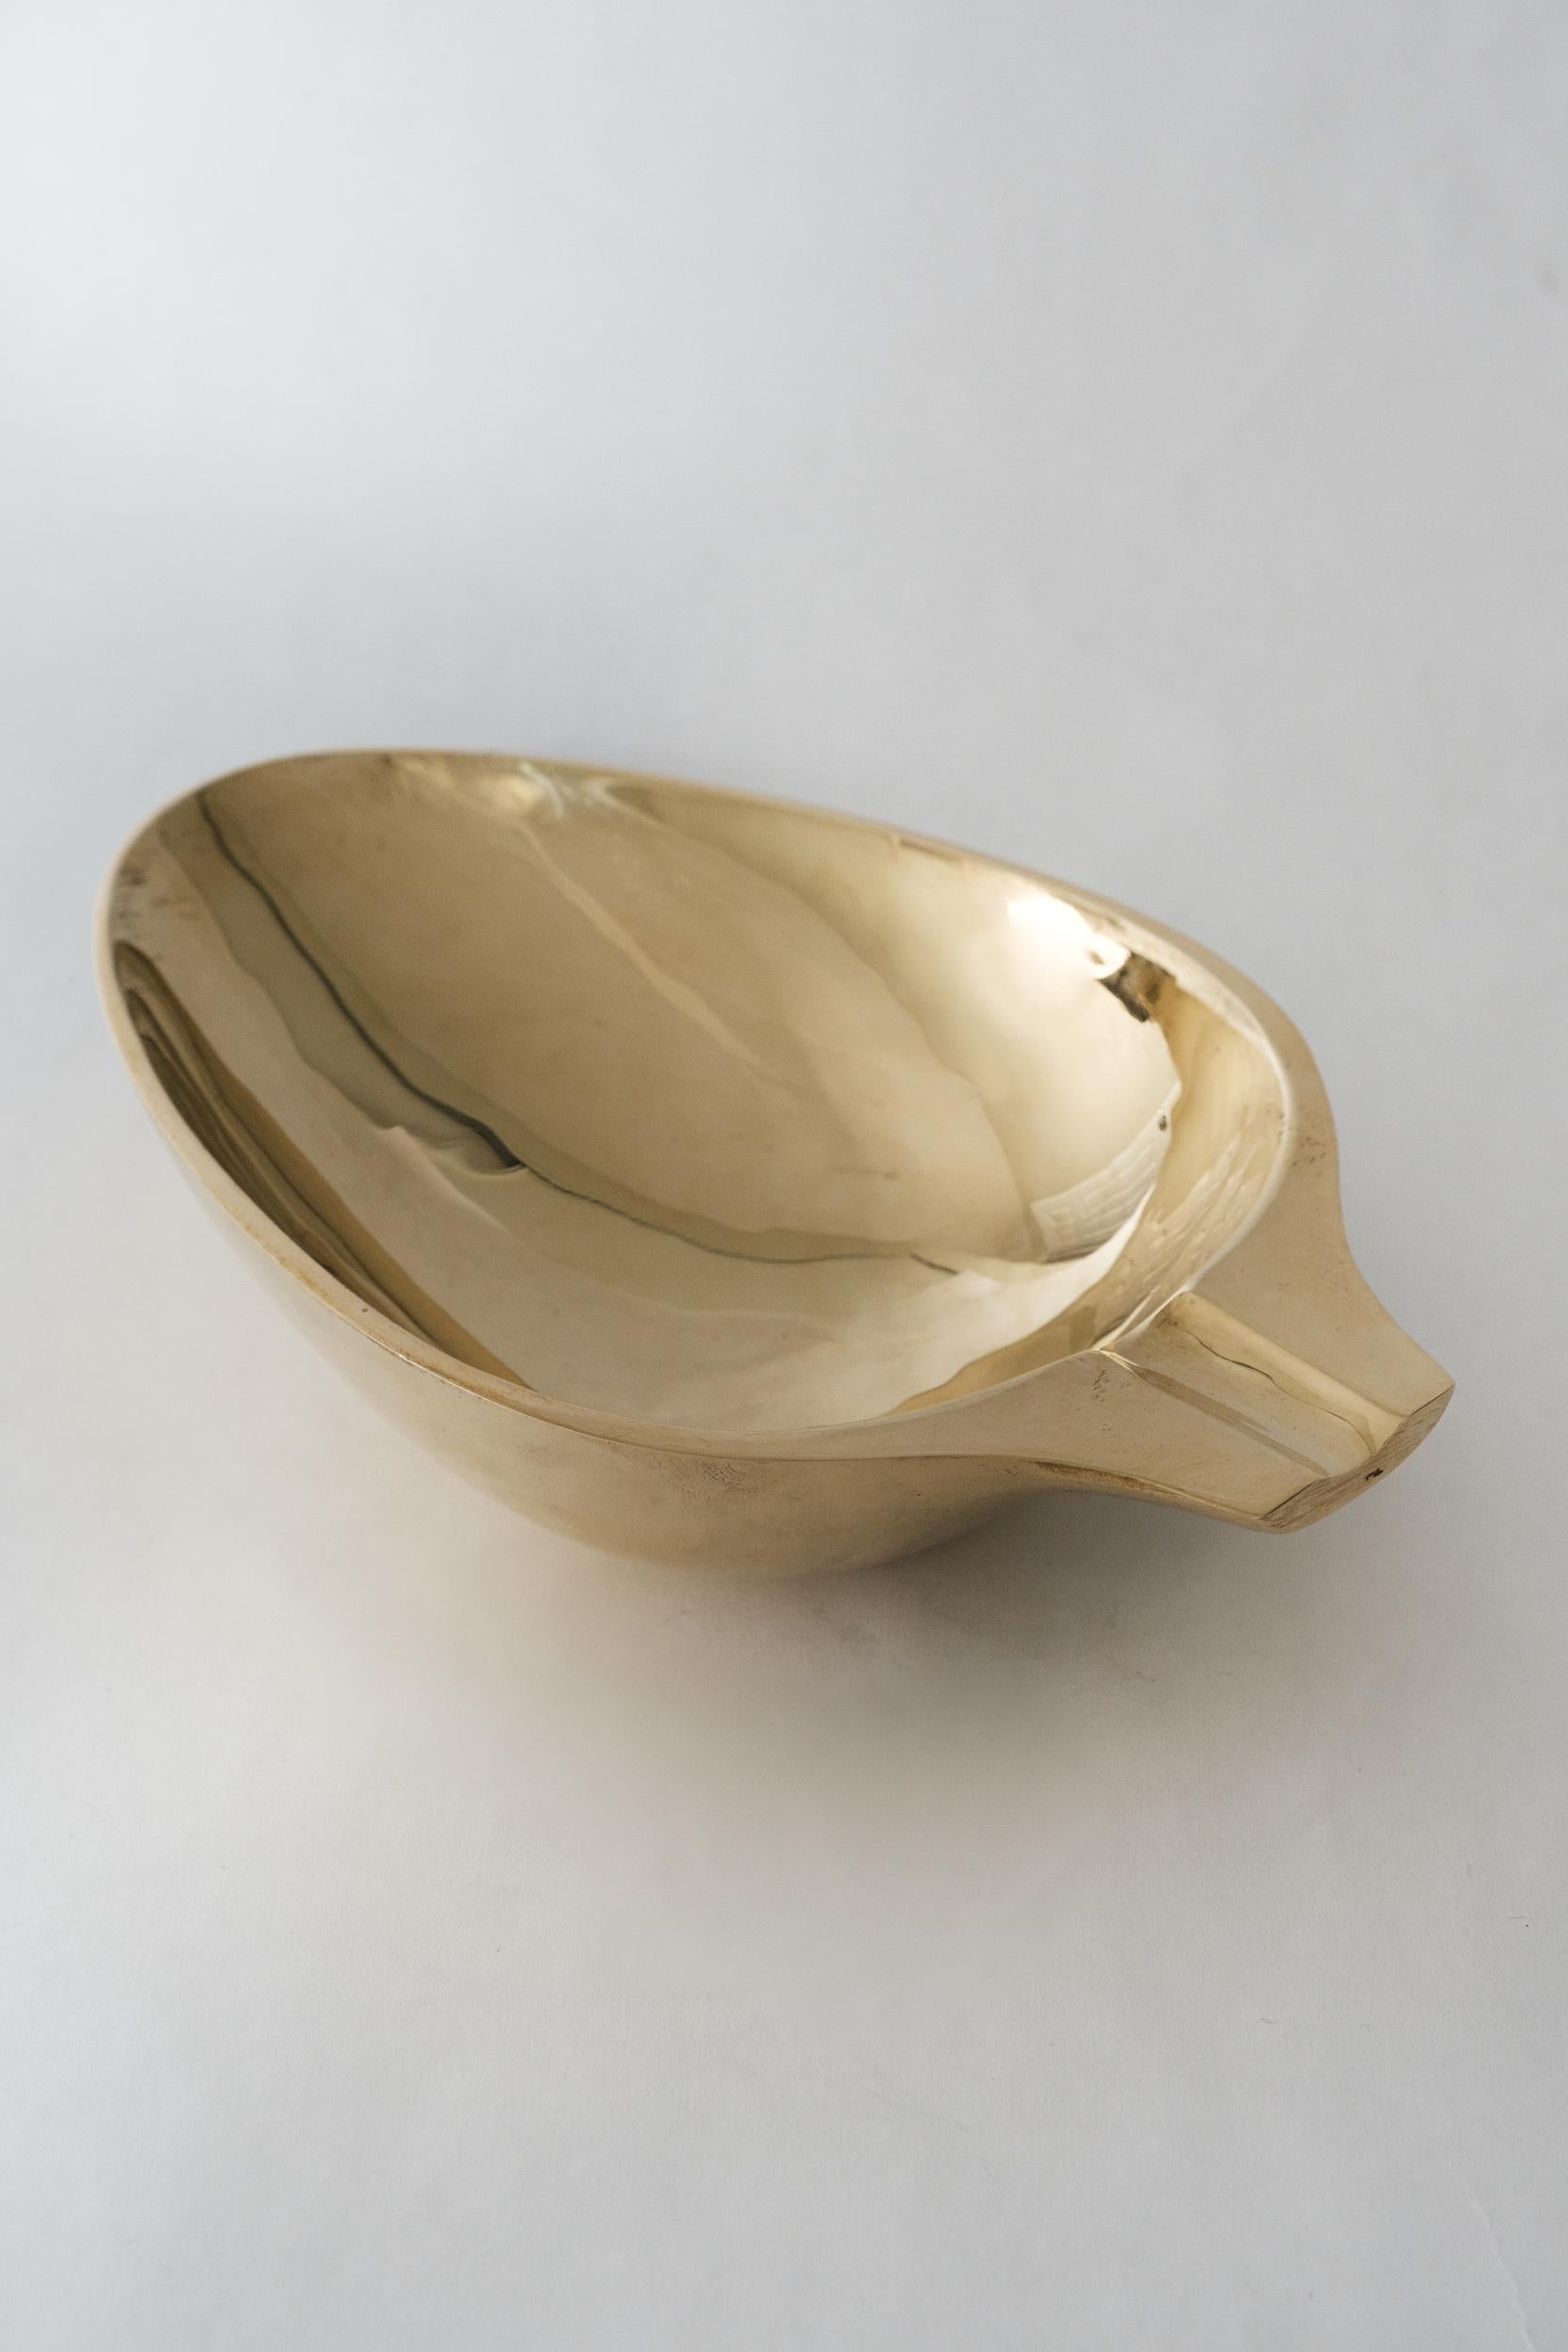 Carl Aubo¨ck Model #3548 polished brass bowl. Designed in the 1950s, this incredibly refined and sculptural Viennese bowl is executed in polished brass. Originally conceived as an ashtray, this decorative vessel can be used for a variety of